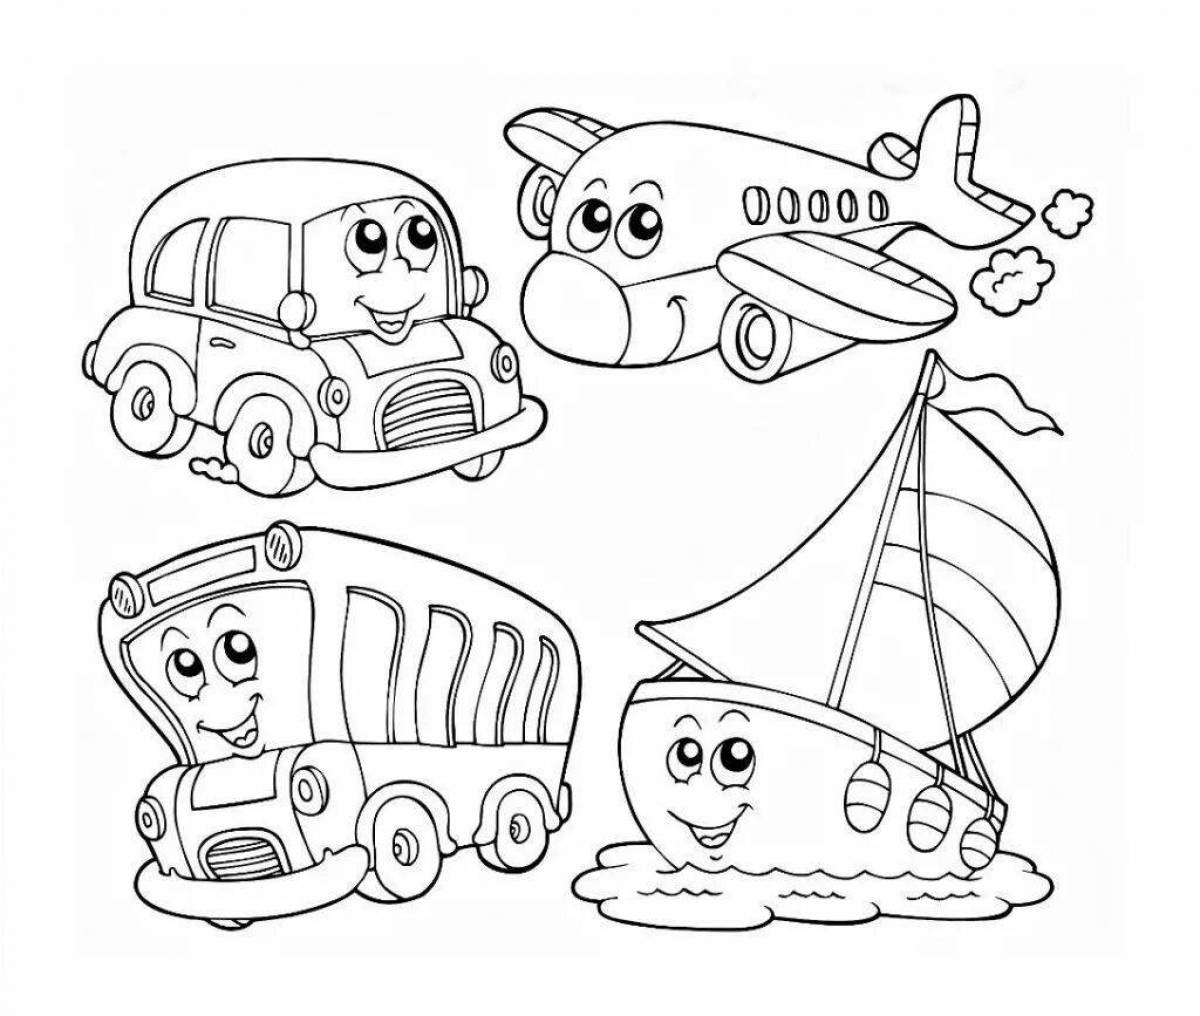 Amazing coloring pdf for kids